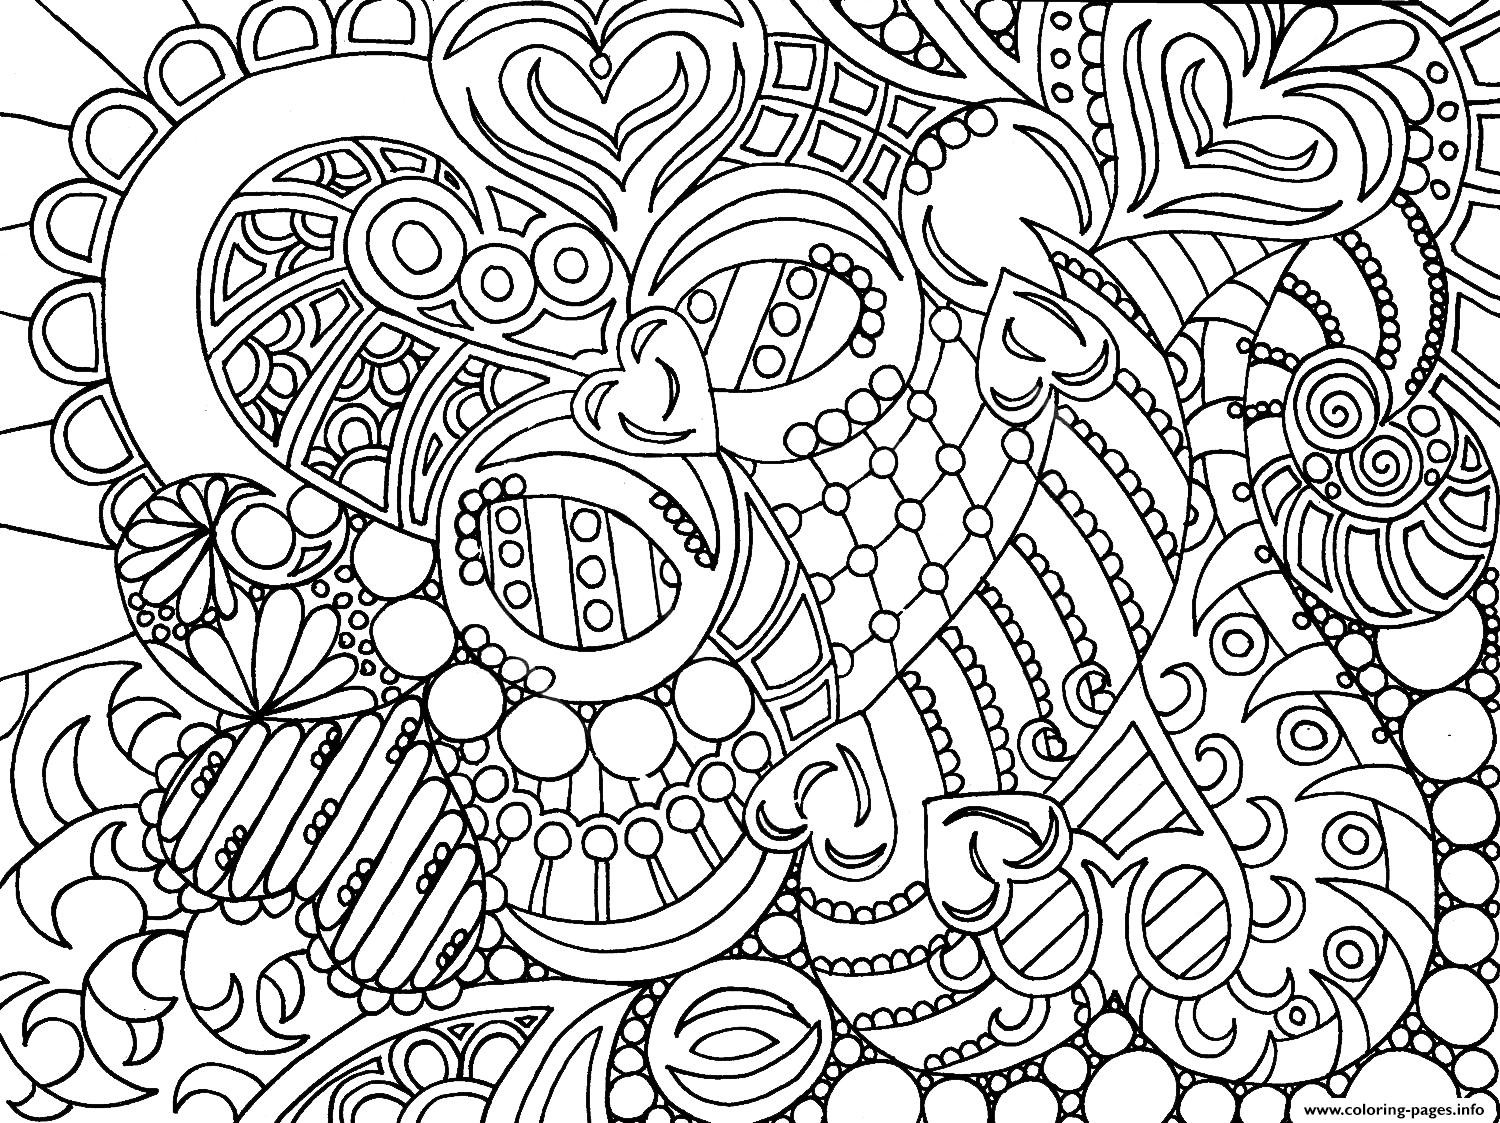 Cool Coloring Pages Printable
 Very Cool Colouring For Adult Coloring Pages Printable